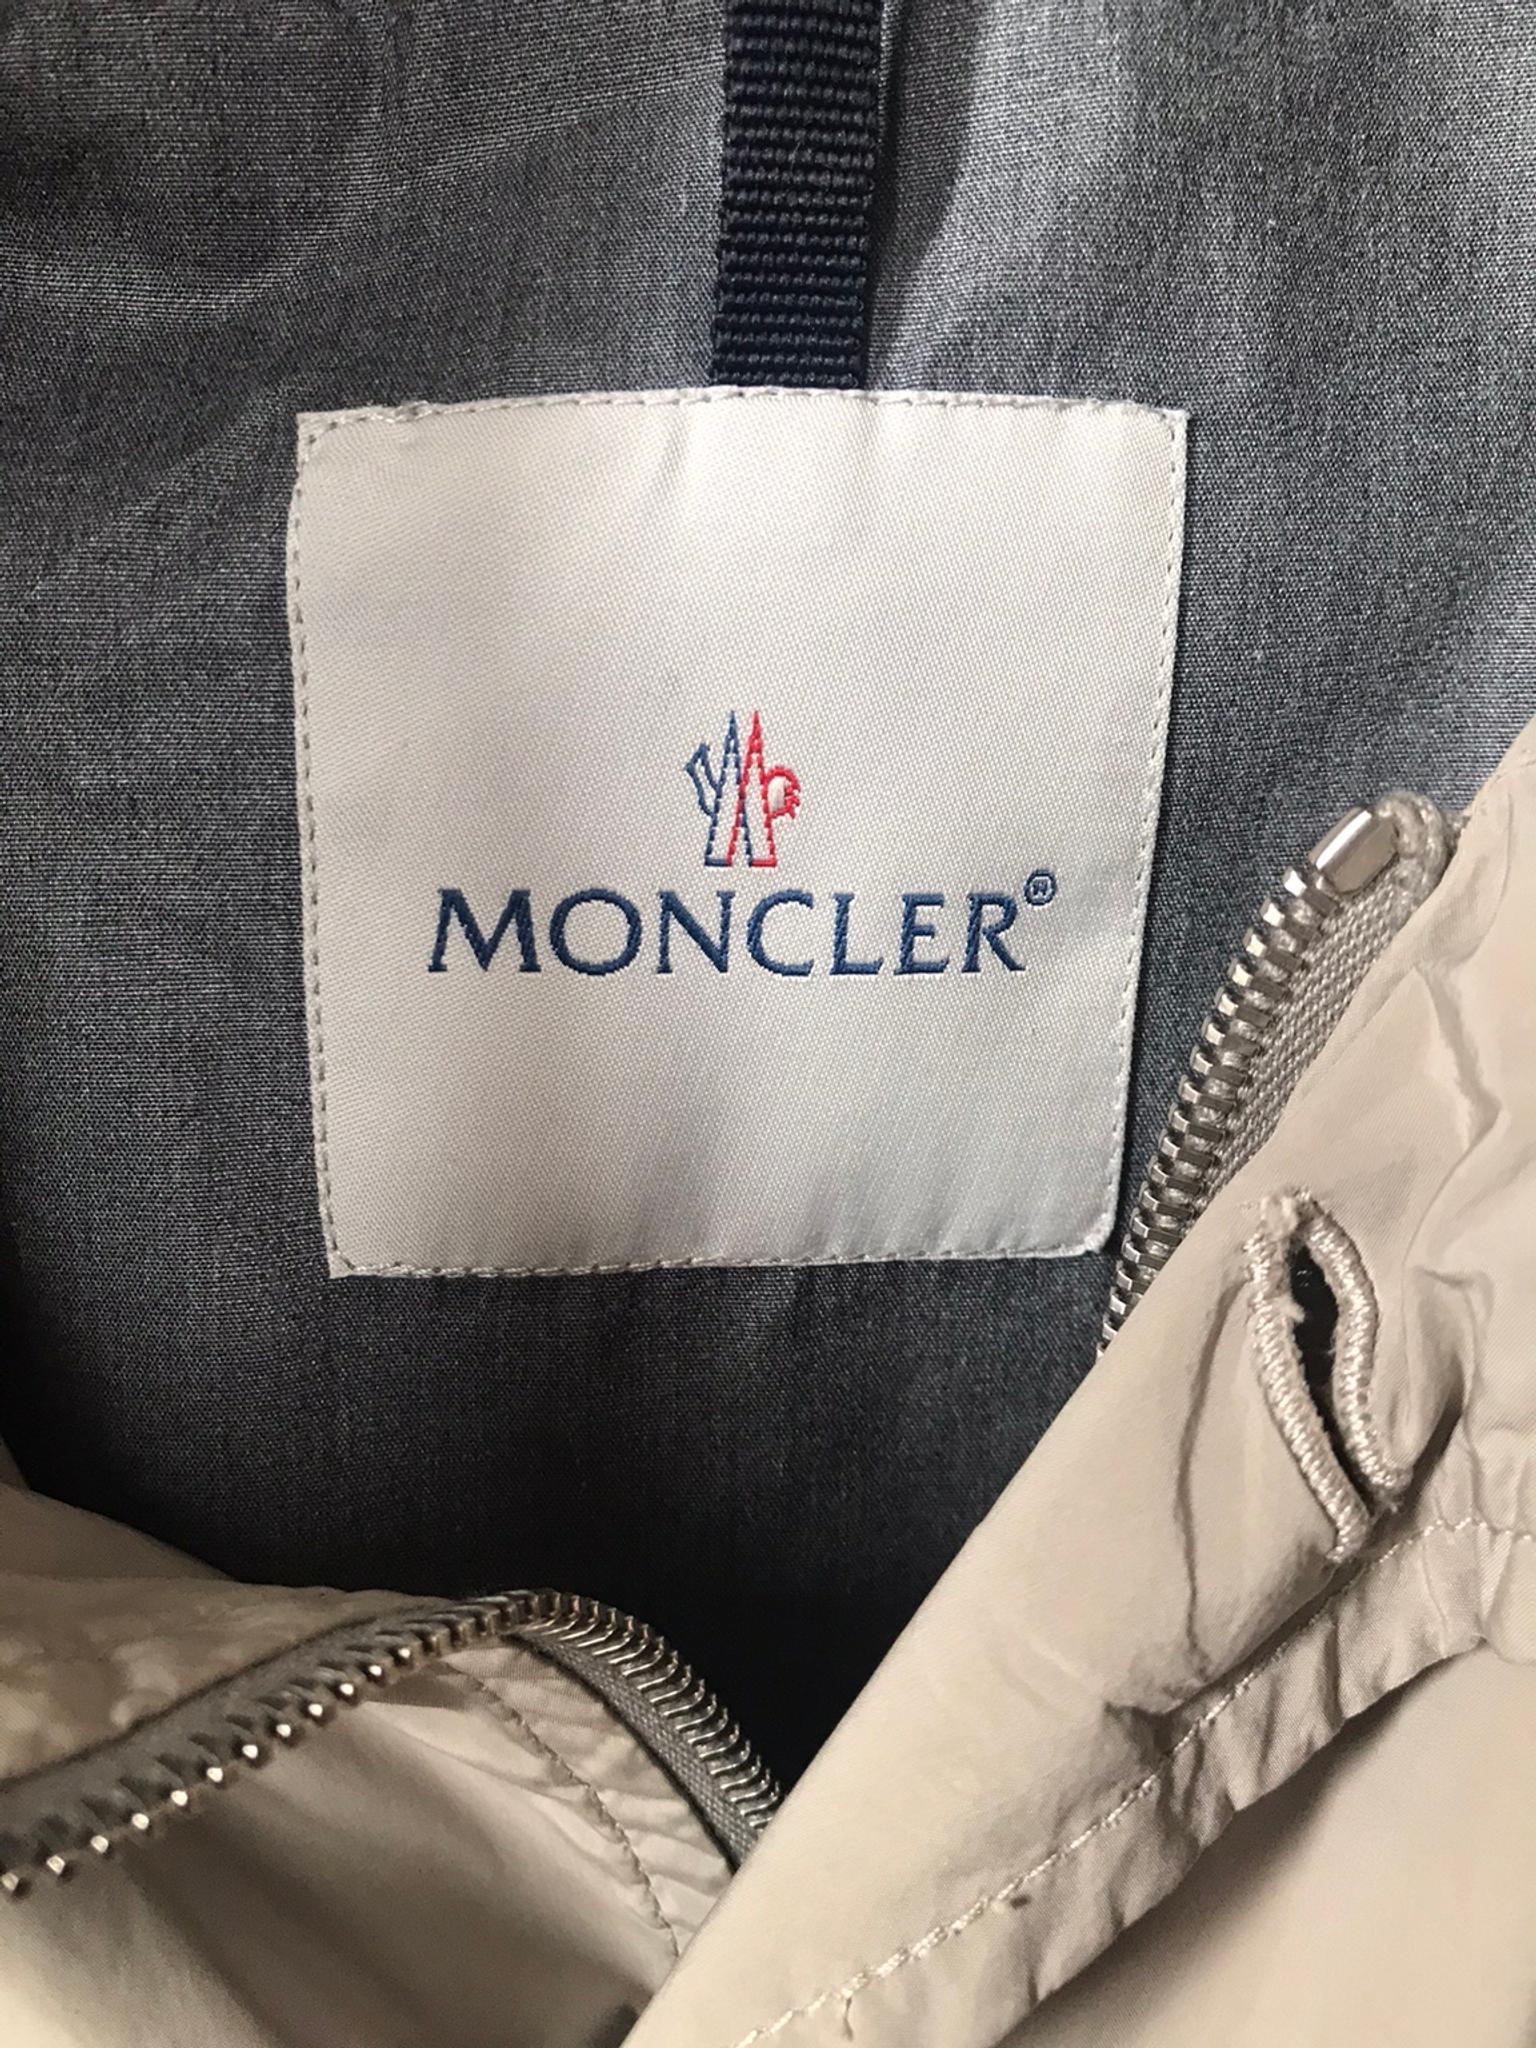 Moncler in 36055 Tezze sul Brenta for €120.00 for sale | Shpock